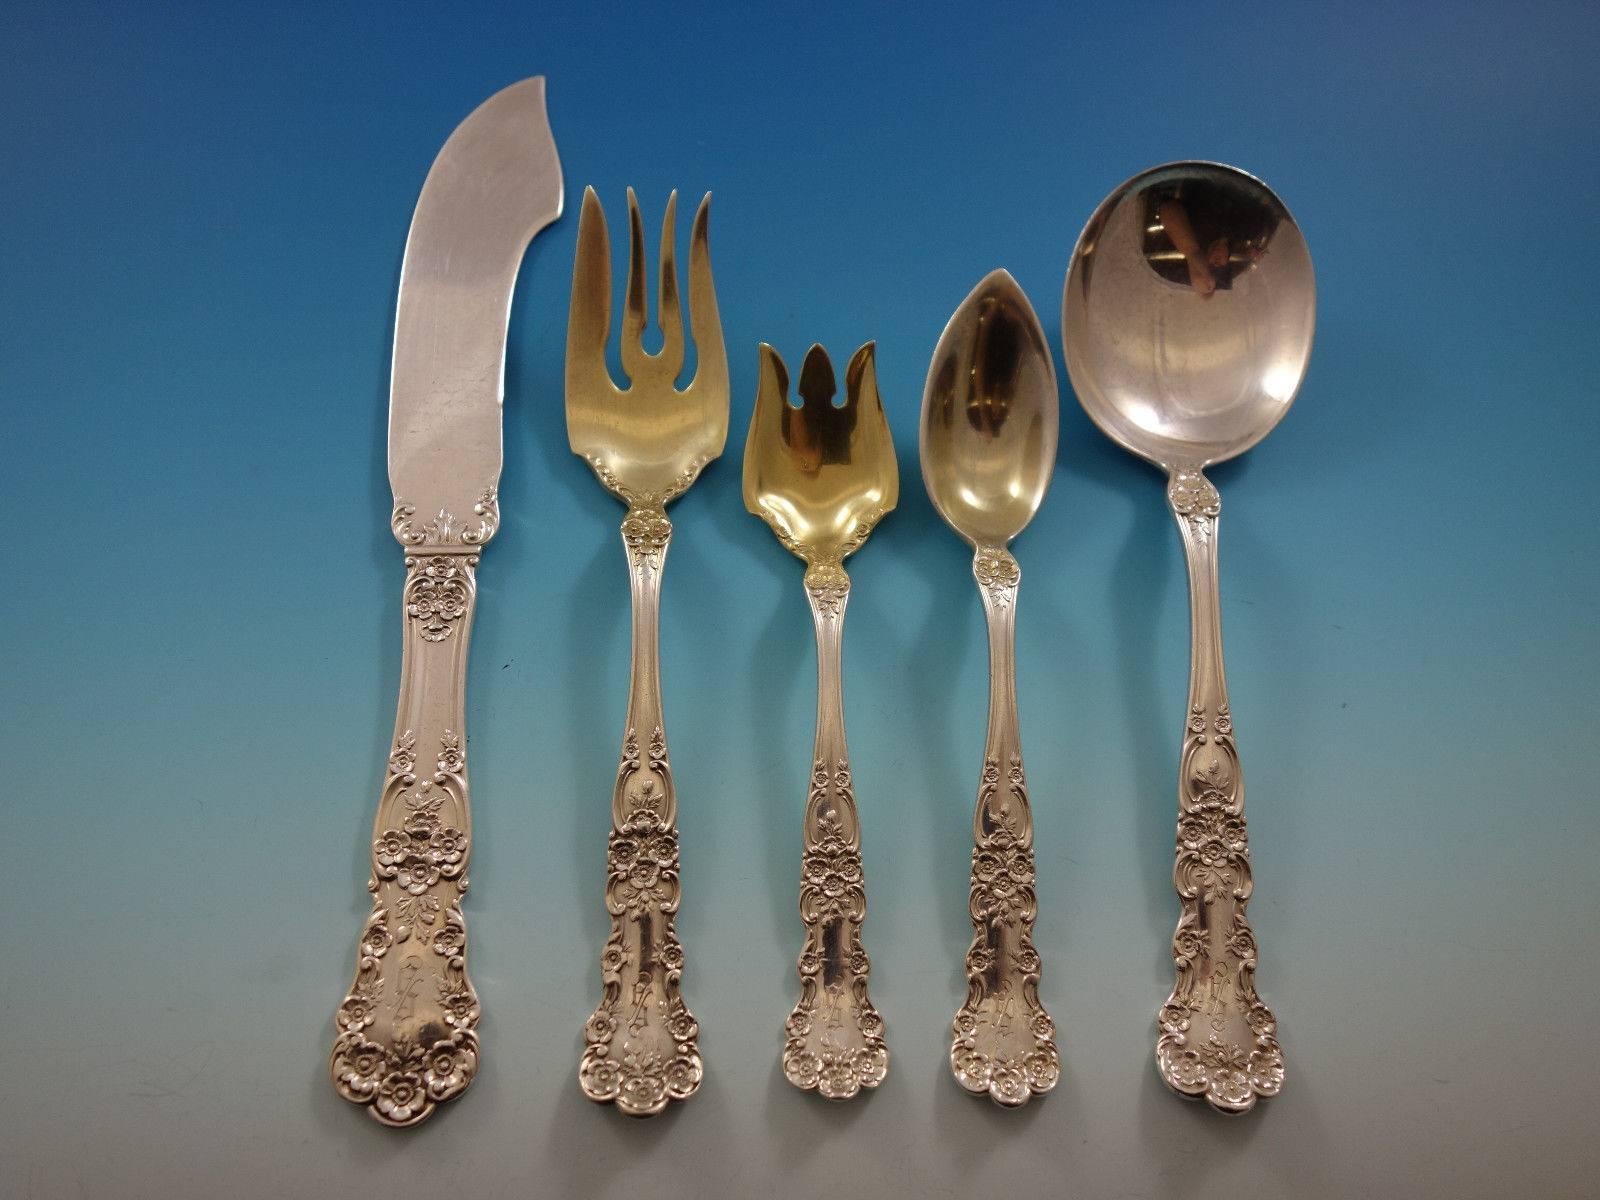 Outstanding Buttercup by Gorham sterling silver flatware set, 286 pieces in huge original vintage fitted chest. This set includes:

12 dinner size knives, 9 1/2